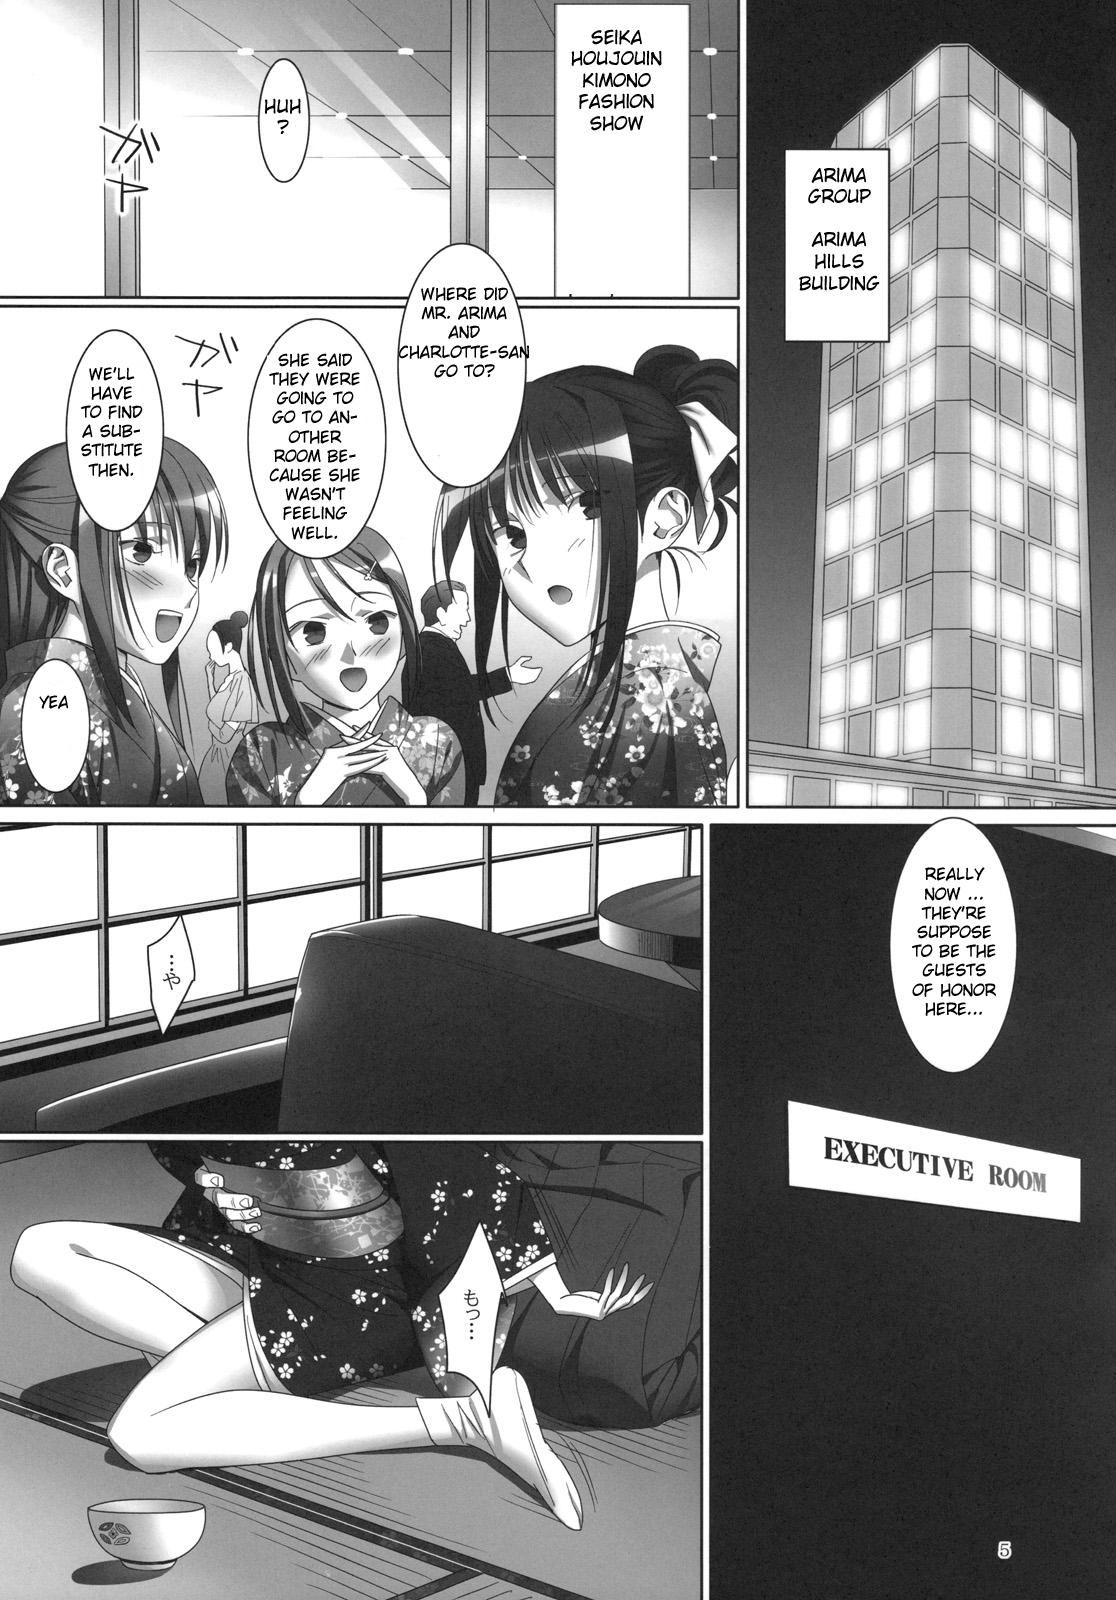 Solo Girl Admired beautiful flower 3 - Princess lover Str8 - Page 5